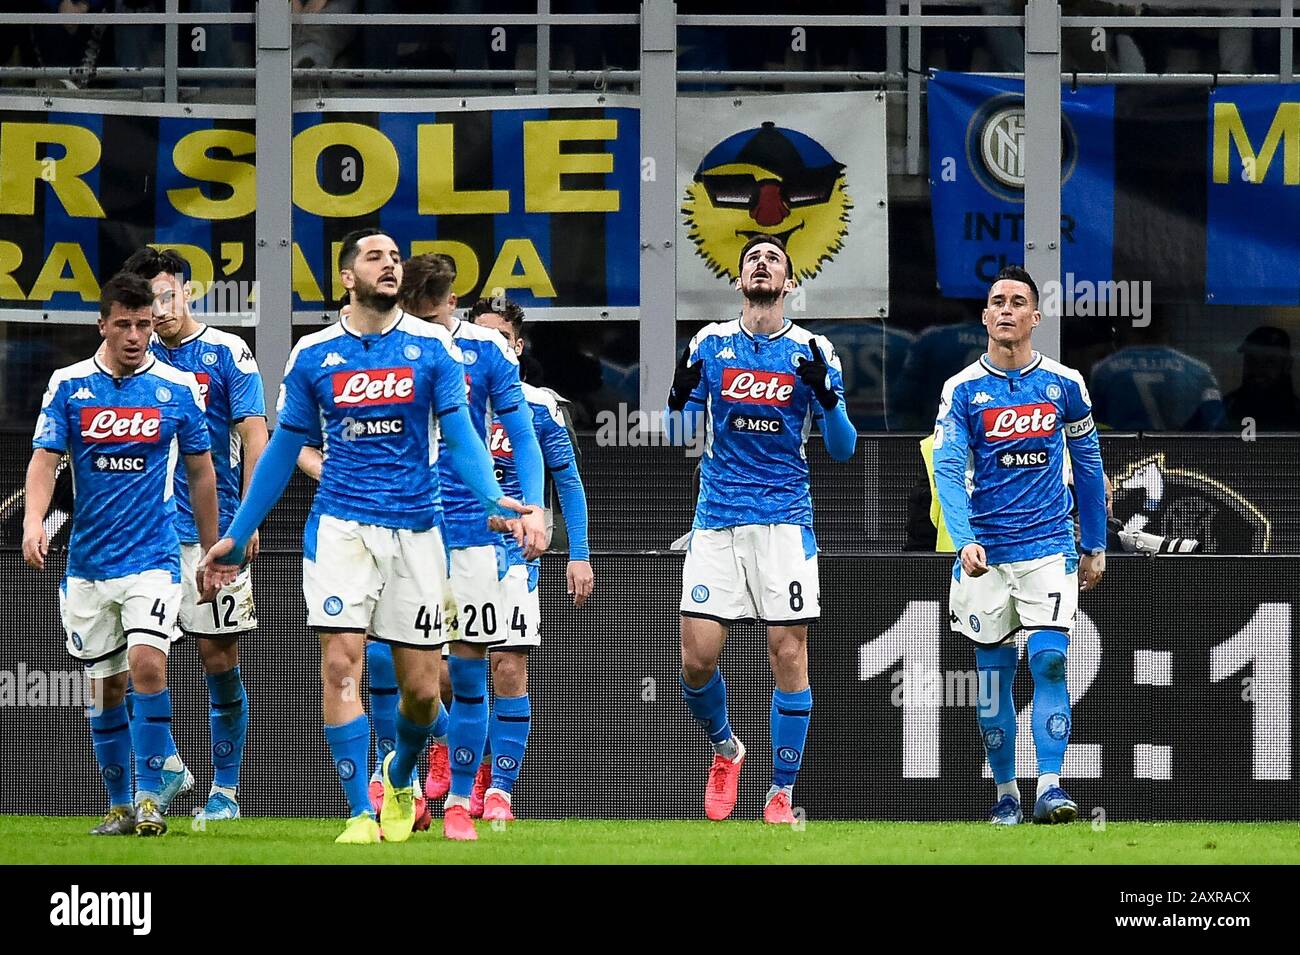 Milan, Italy - 12 February, 2020: Fabian Ruiz (2nd from R) of SSC Napoli celebrates after scoring a goal during the Coppa Italia semi final football match between FC Internazionale and SSC Napoli. Credit: Nicolò Campo/Alamy Live News Stock Photo